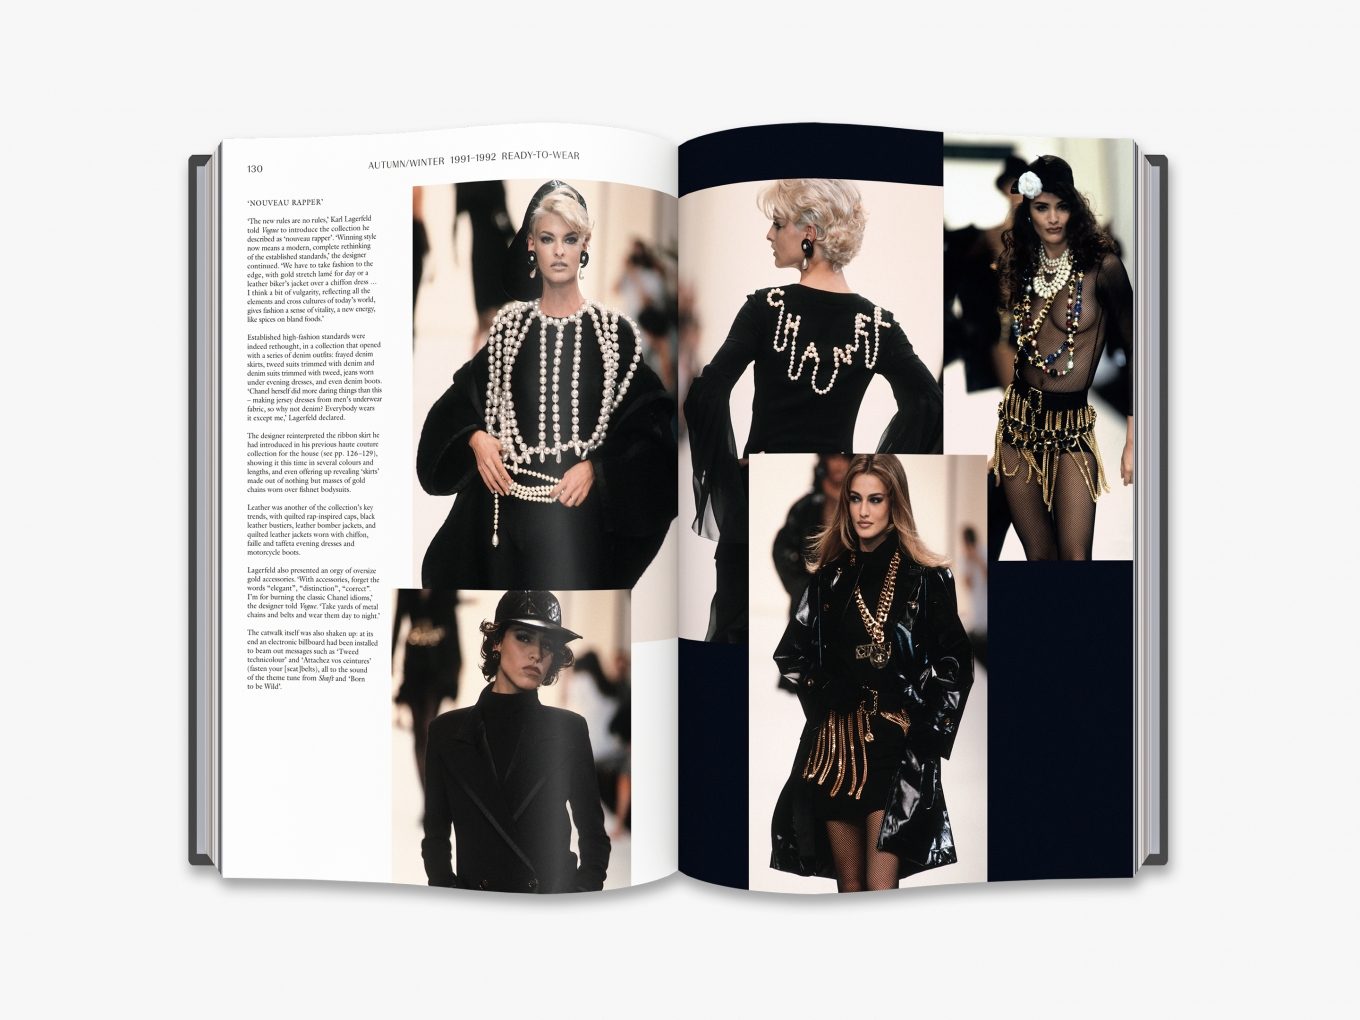 Chanel Catwalk: The Complete Collections by MAURIES PATRICK